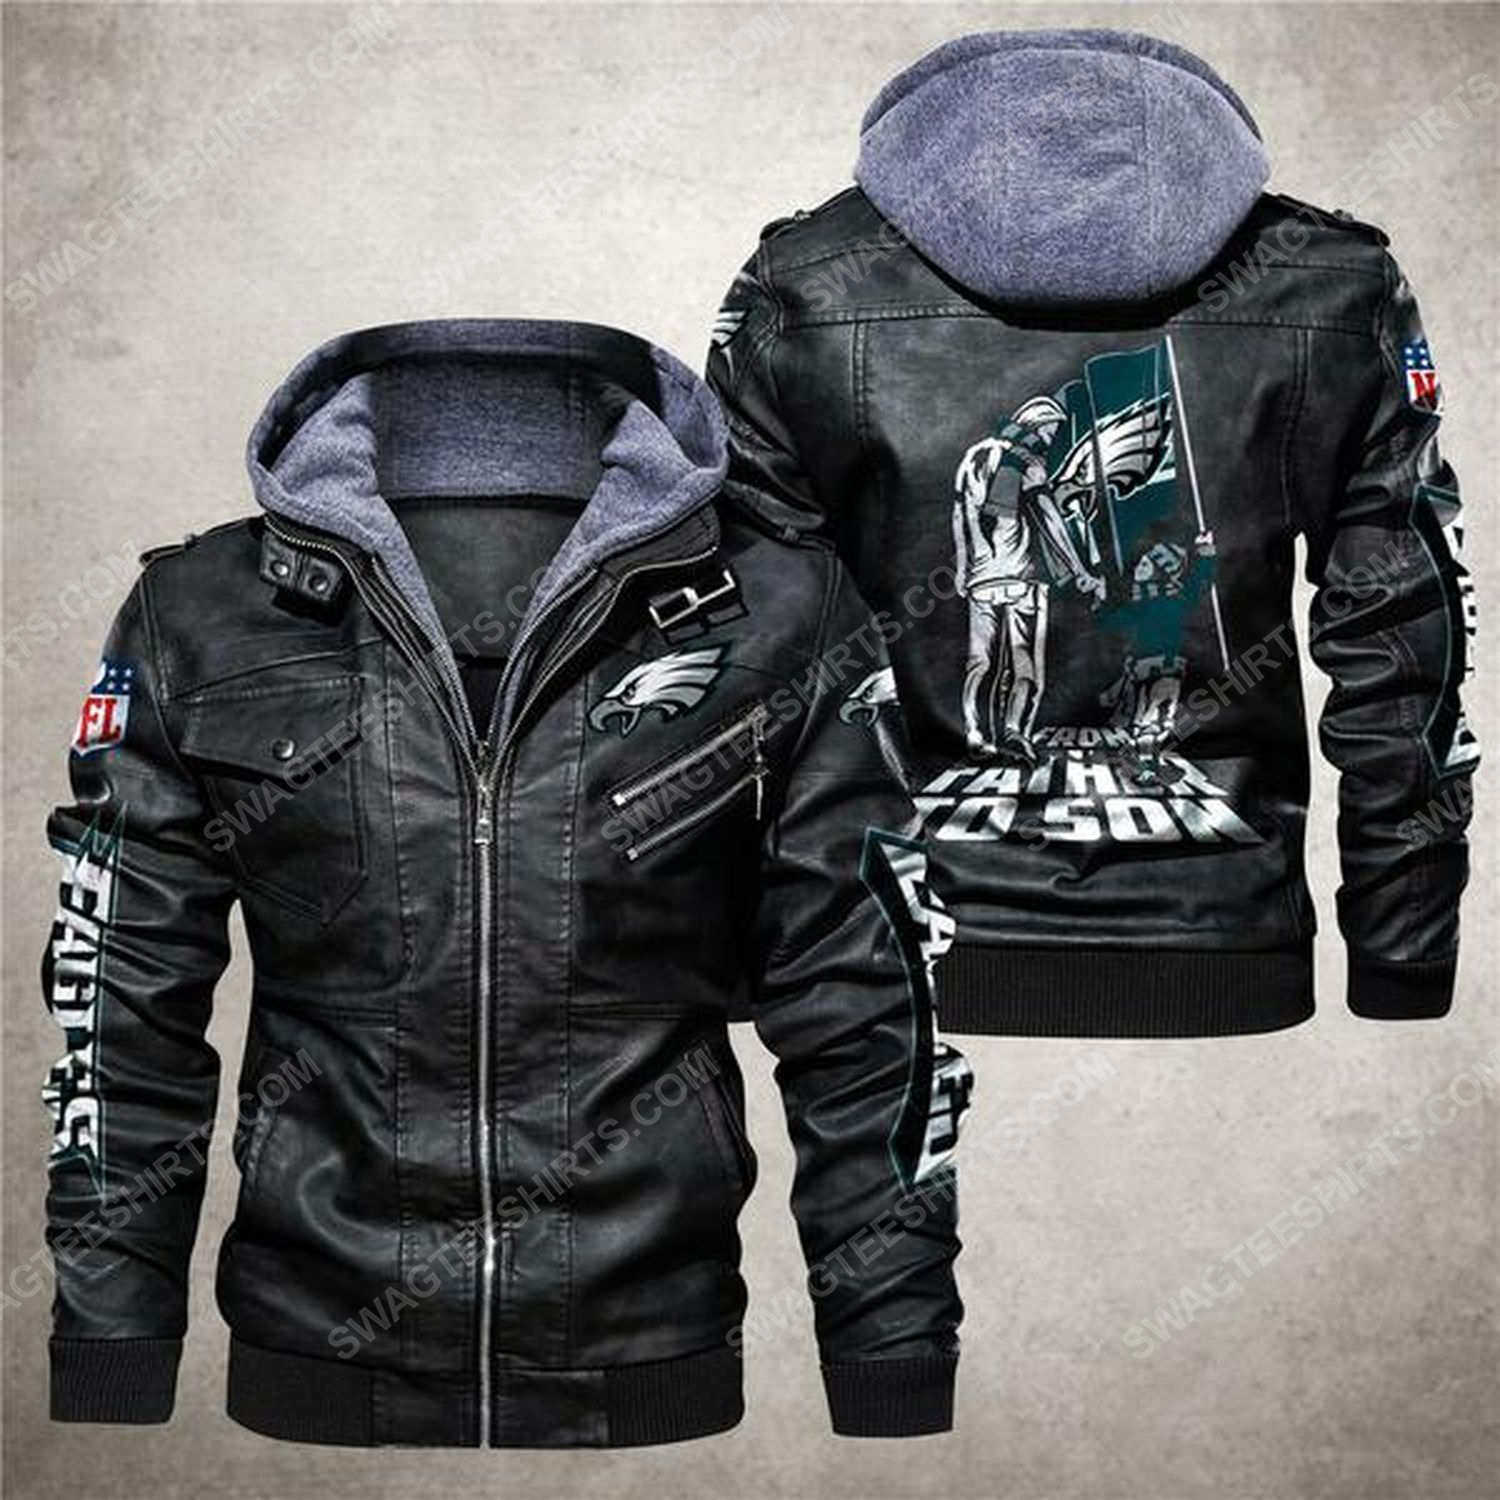 [special edition] National football league philadelphia eagles from father to son leather jacket – Maria